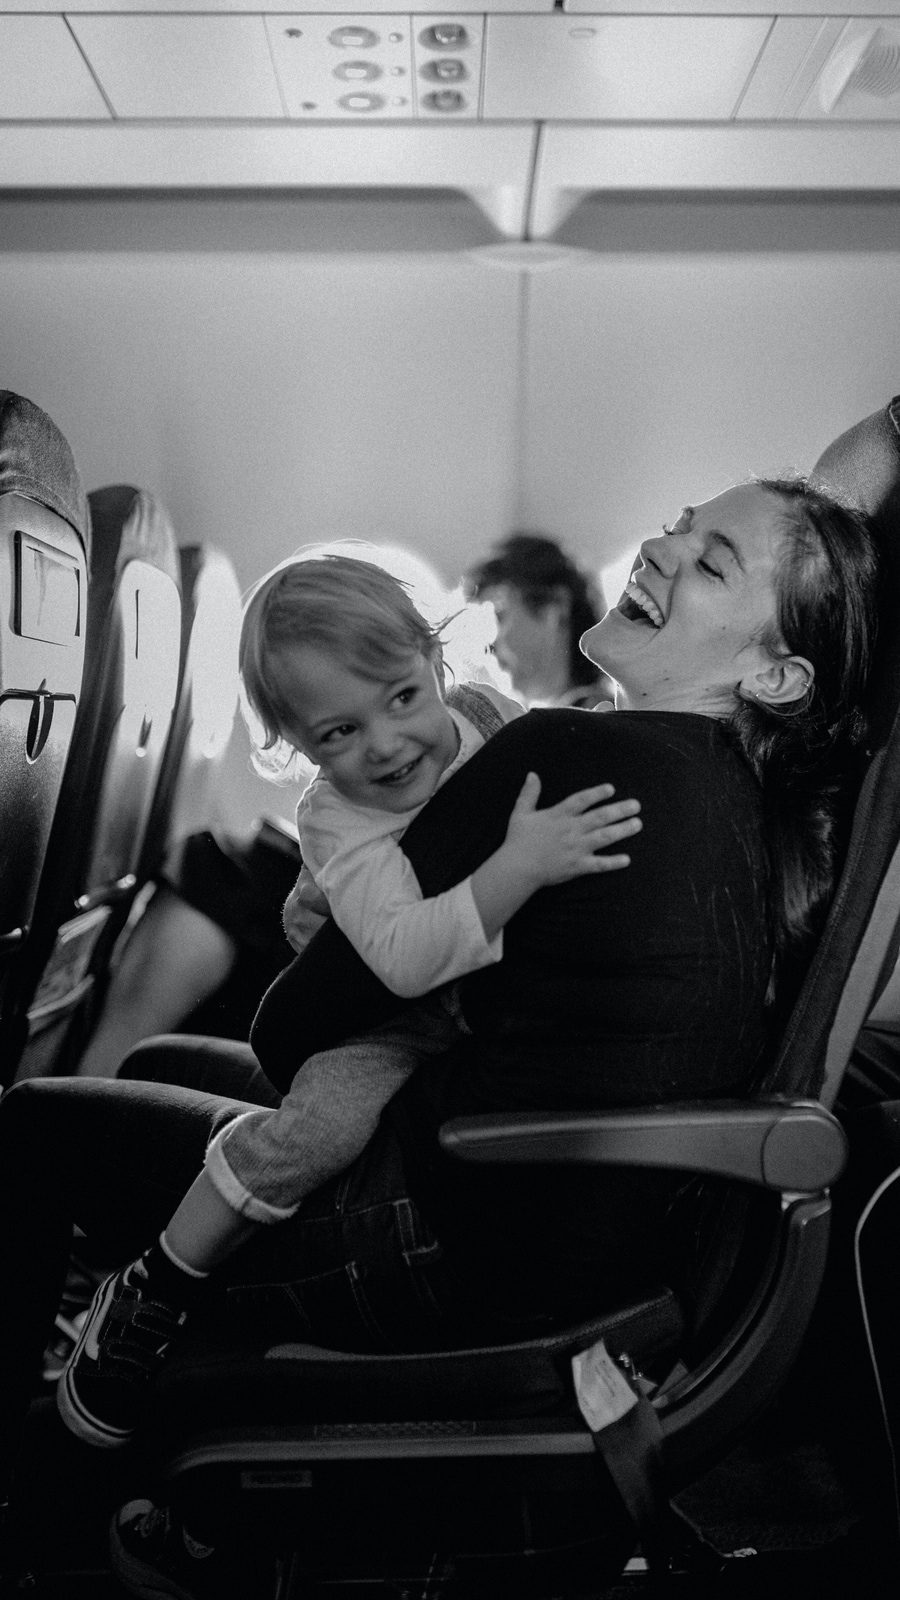 Tips To Travel With A Baby On Plane